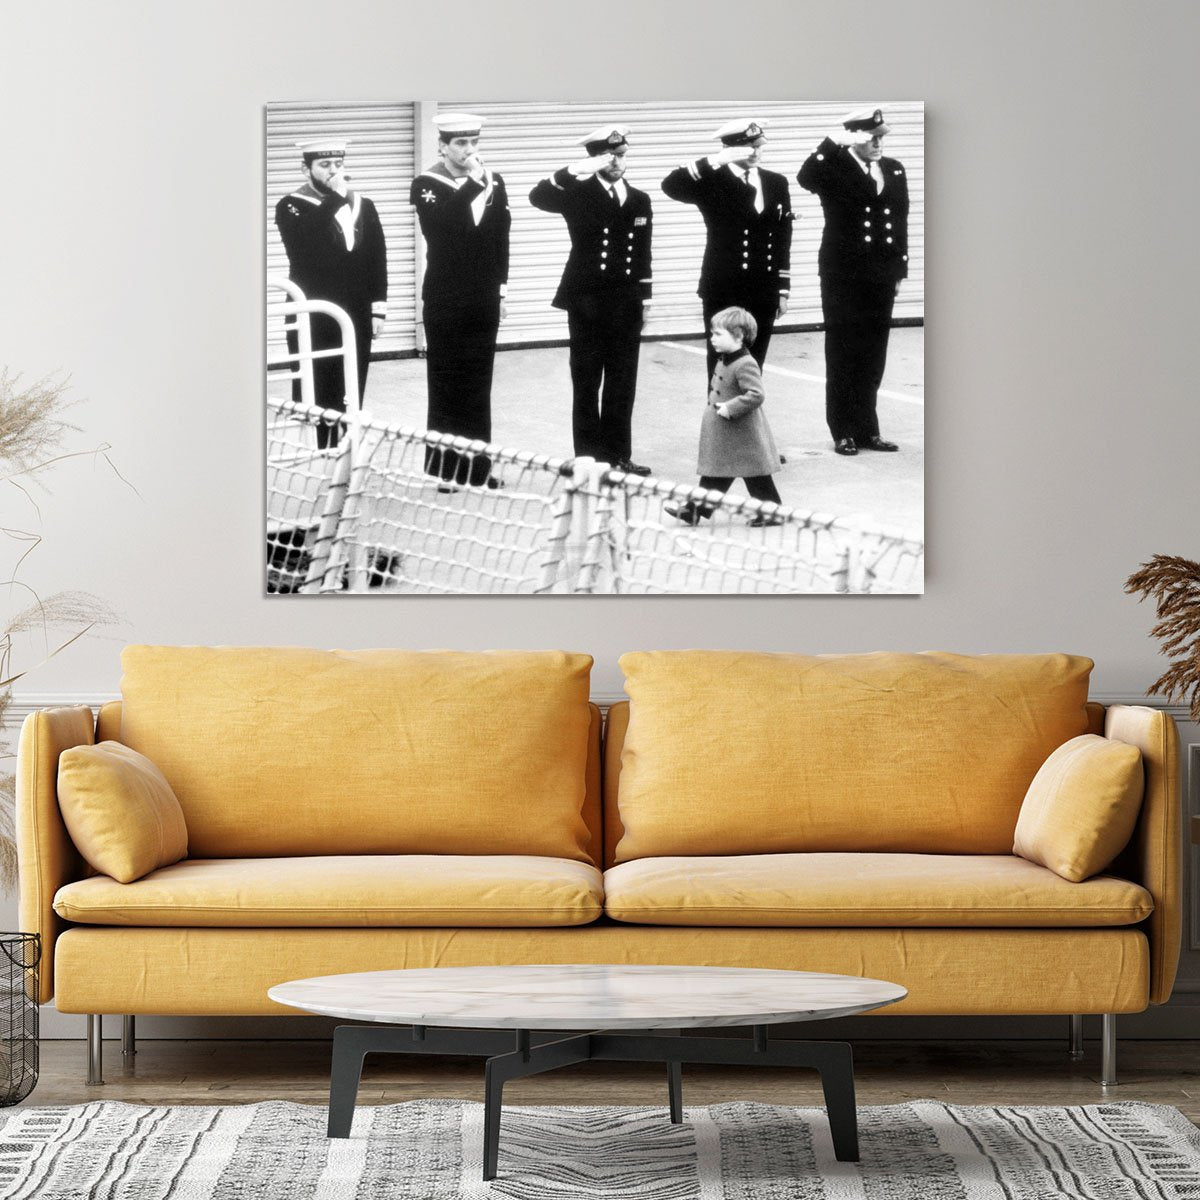 Prince William visiting the Royal Navy as a small child Canvas Print or Poster